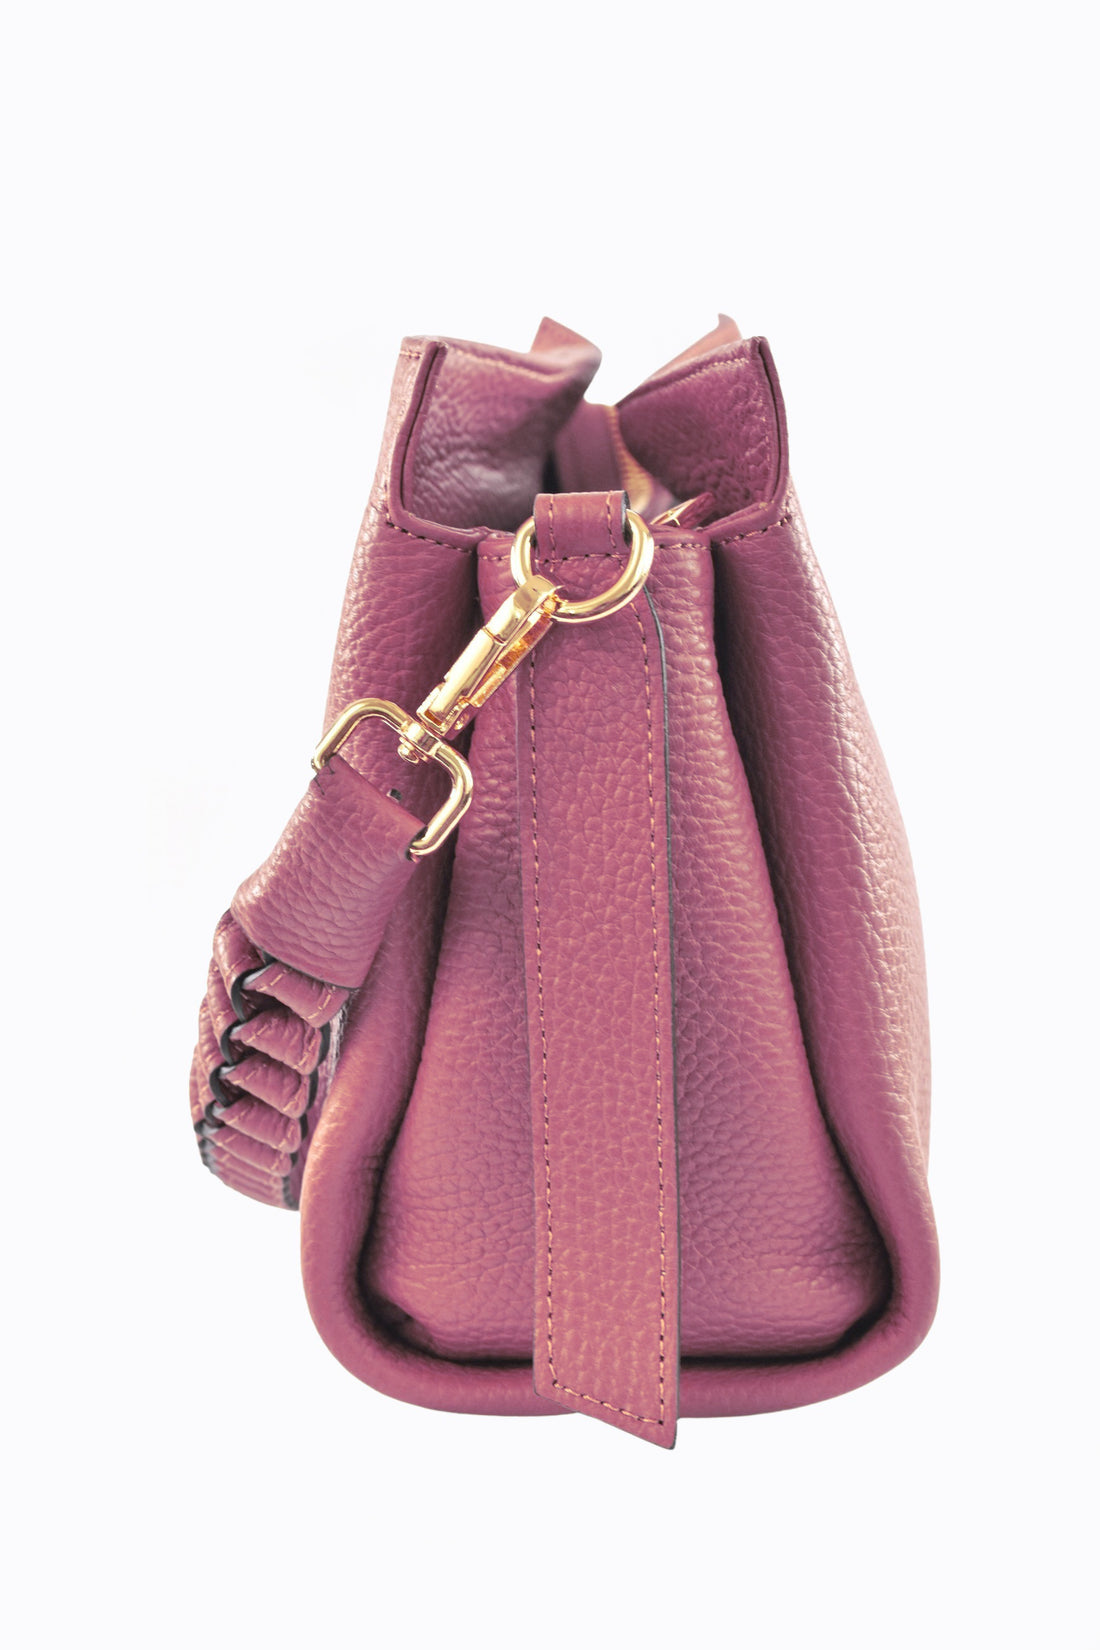 Braid Micro bag in Antique Pink Dollar leather